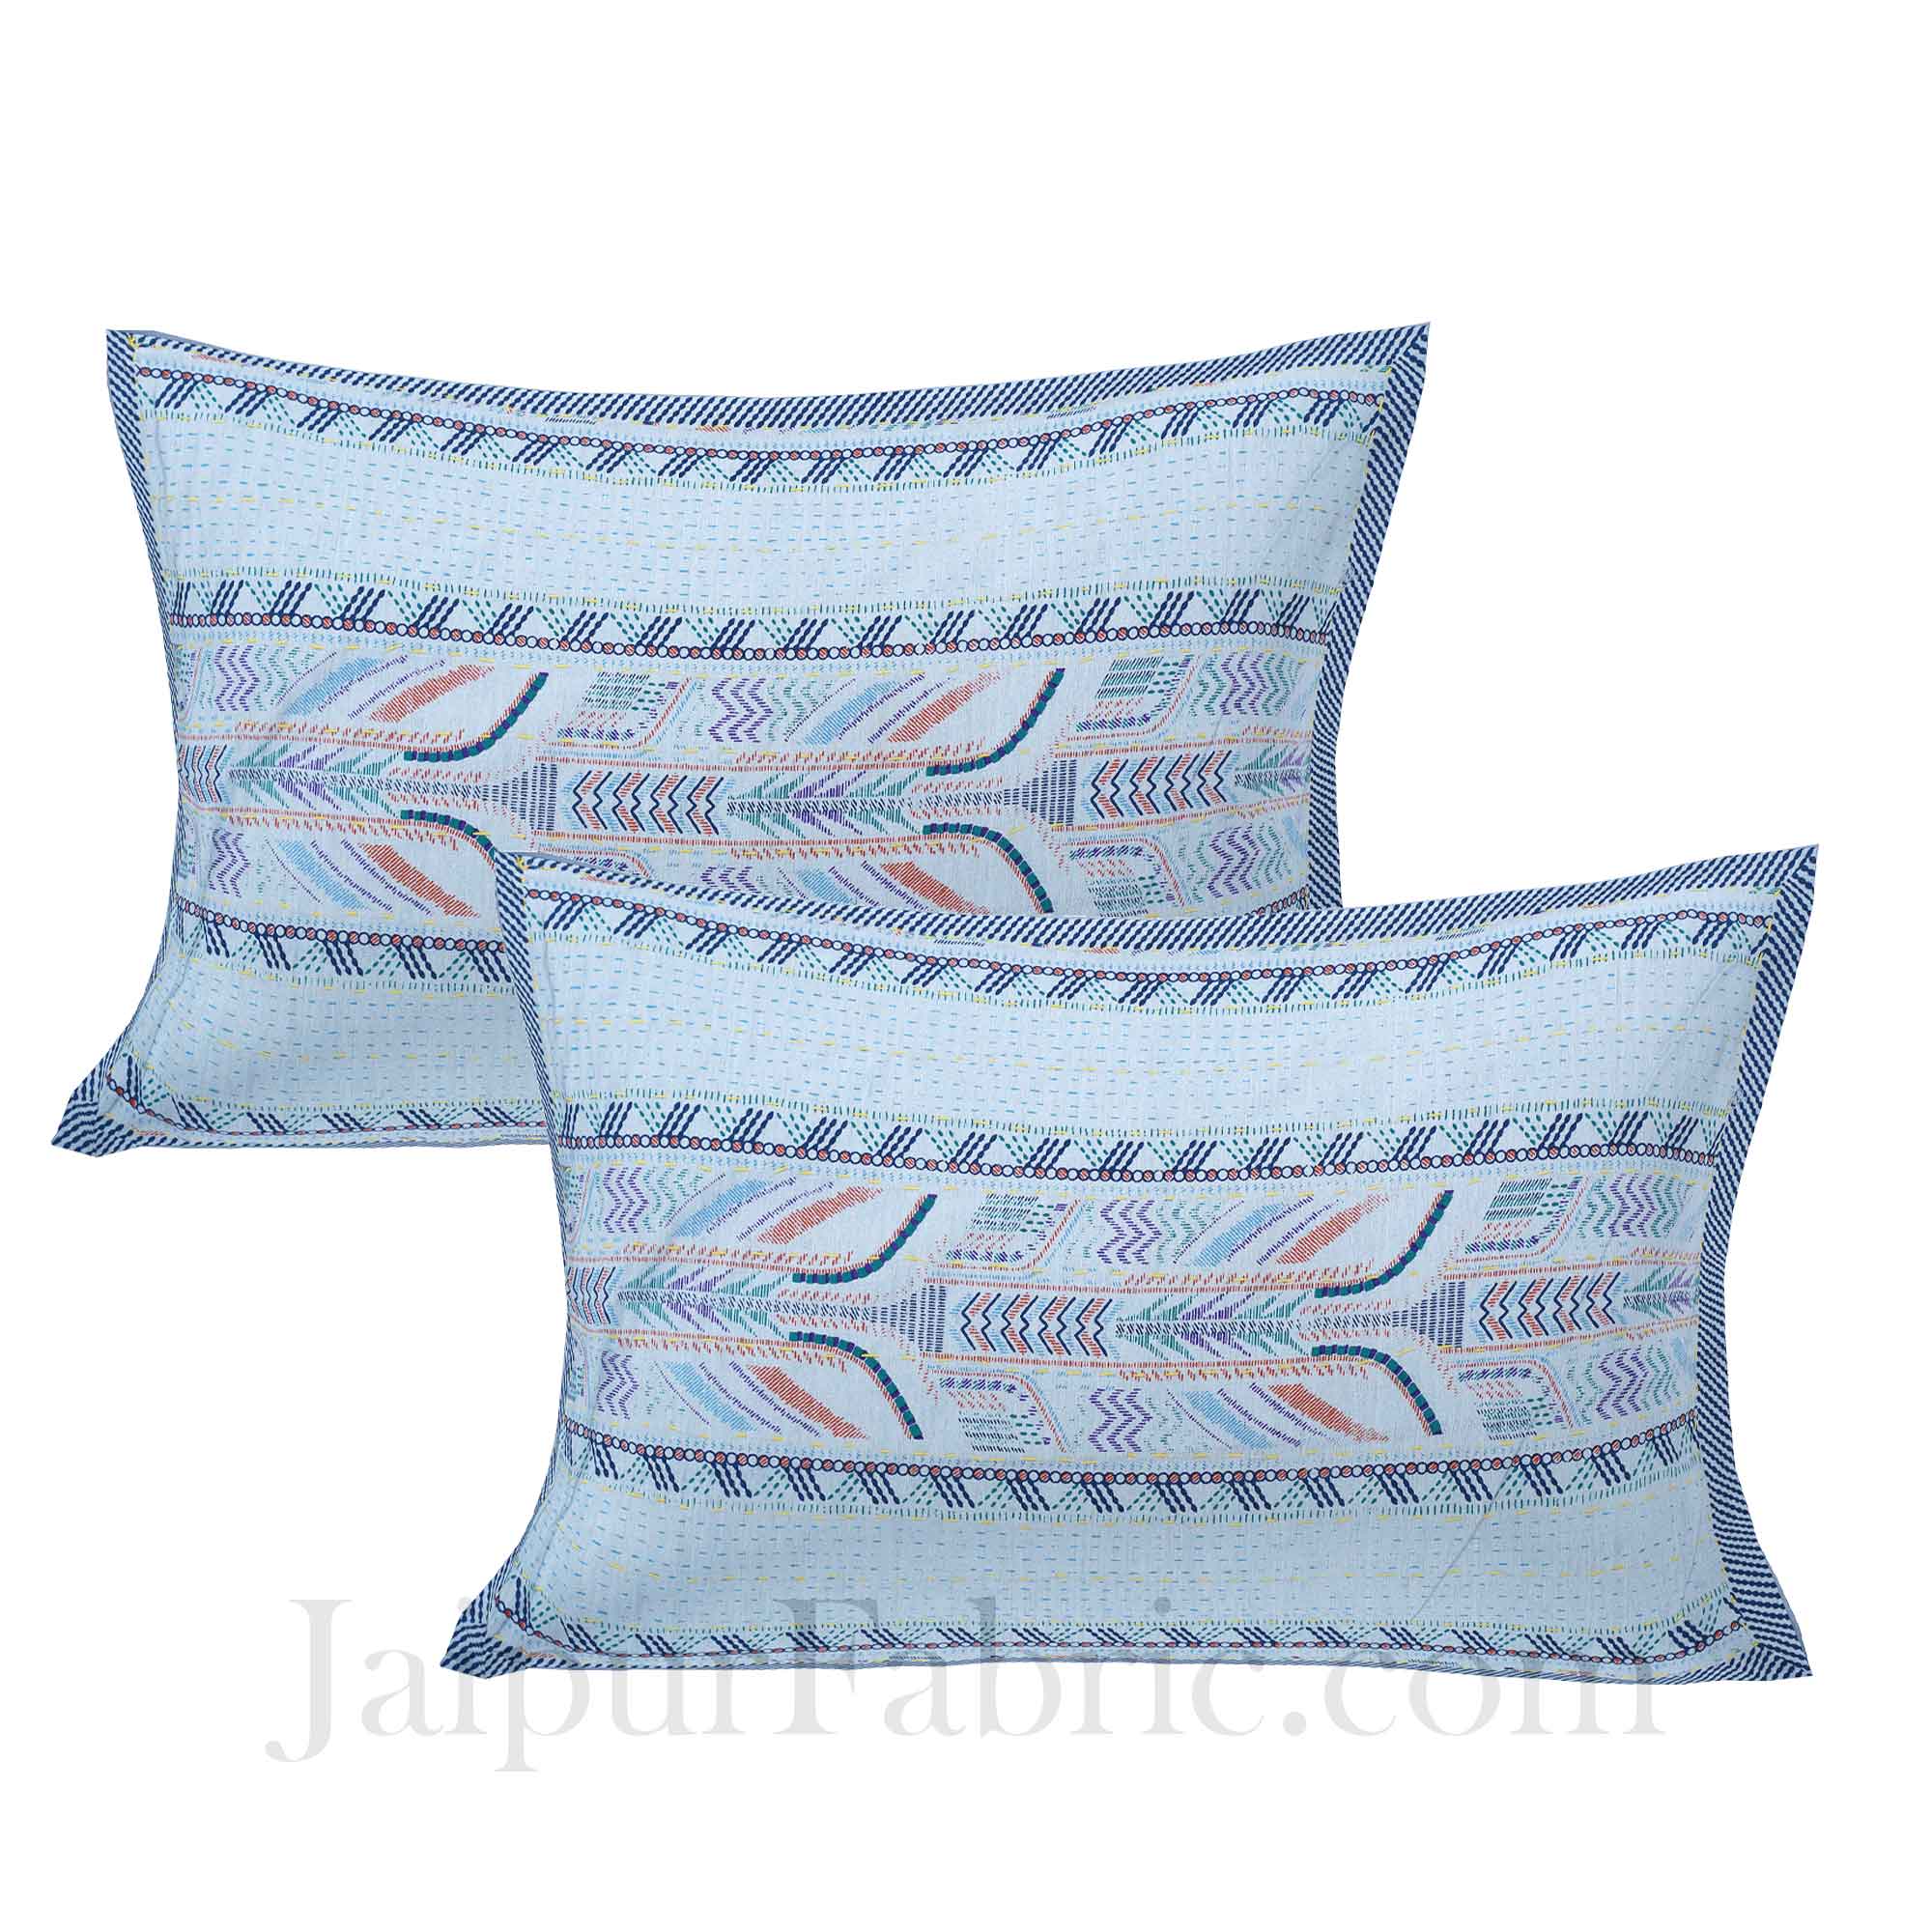 Blueish Grey Lineal Style Kantha Thread Work Embroidery Double Bedsheet / Dohar / Light Blanket / Thin Comforter